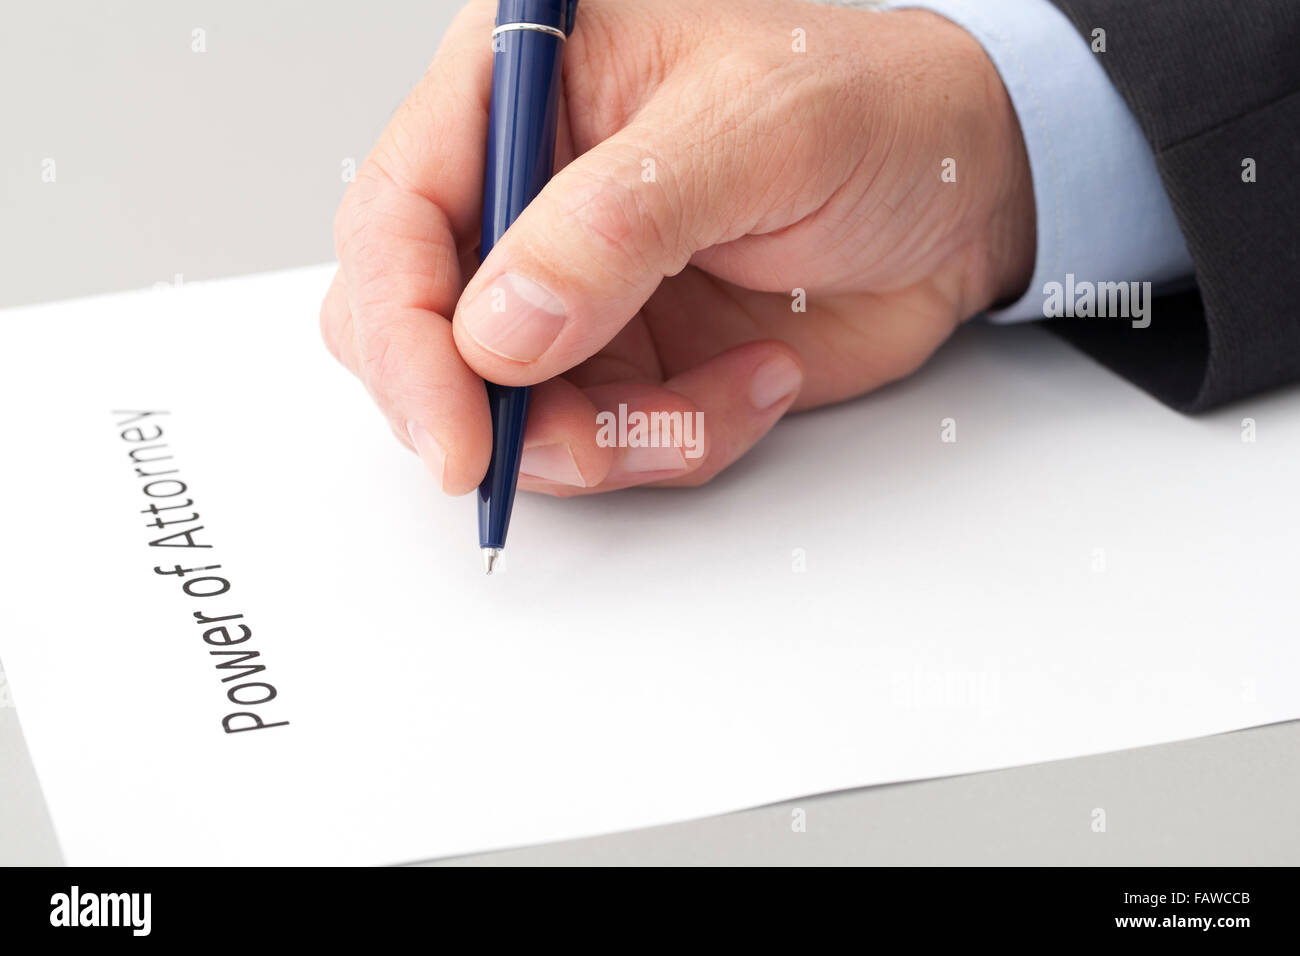 Businessman with a pen in the hand, writing a power of attorney document. The sheet is on the table Stock Photo